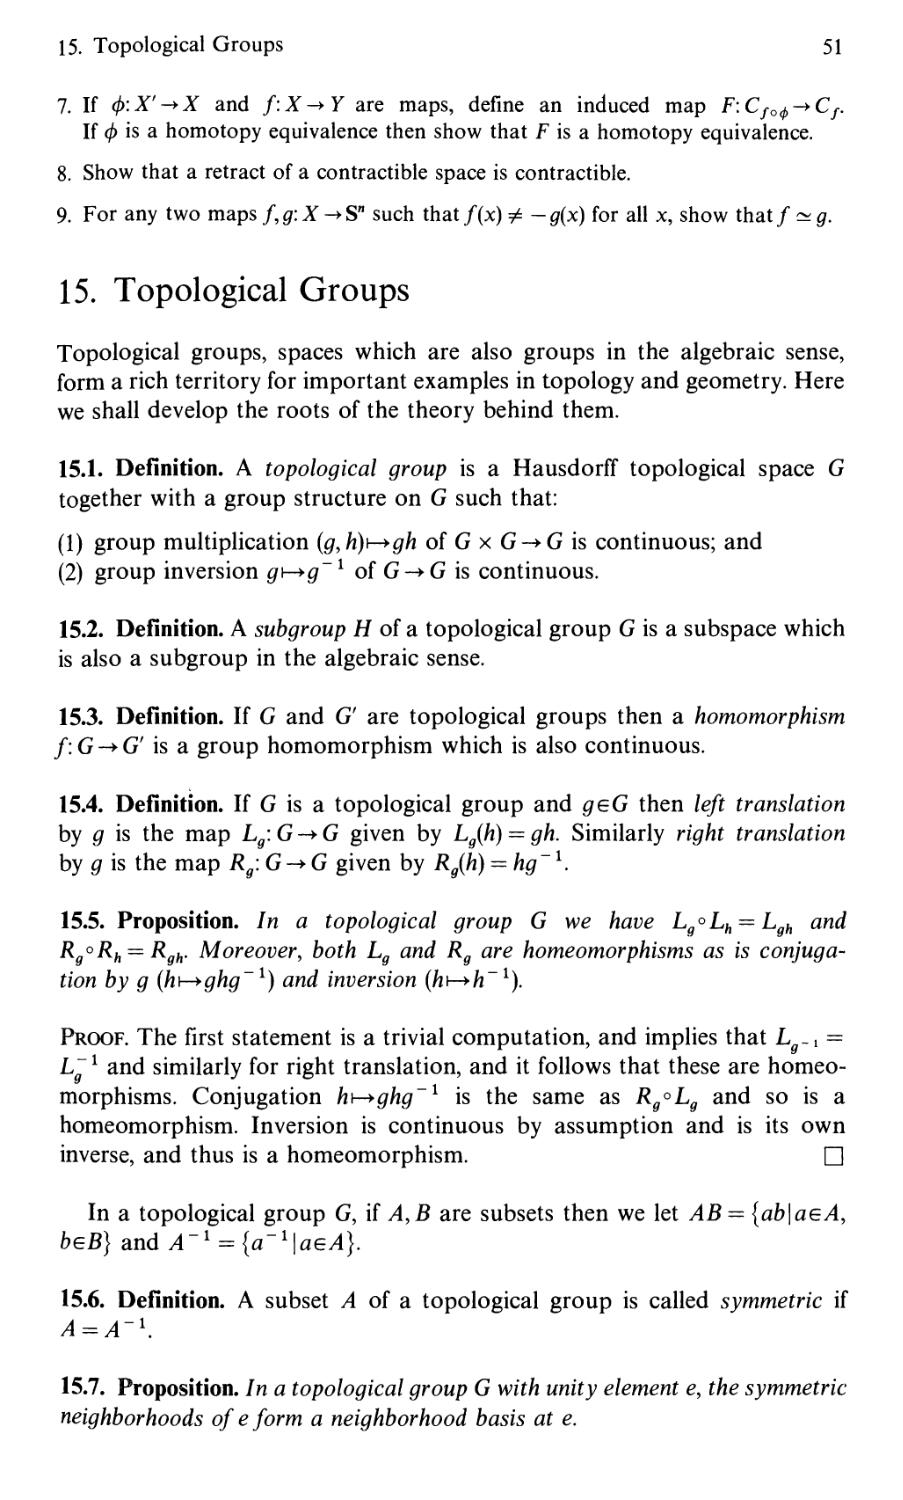 15. Topological Groups